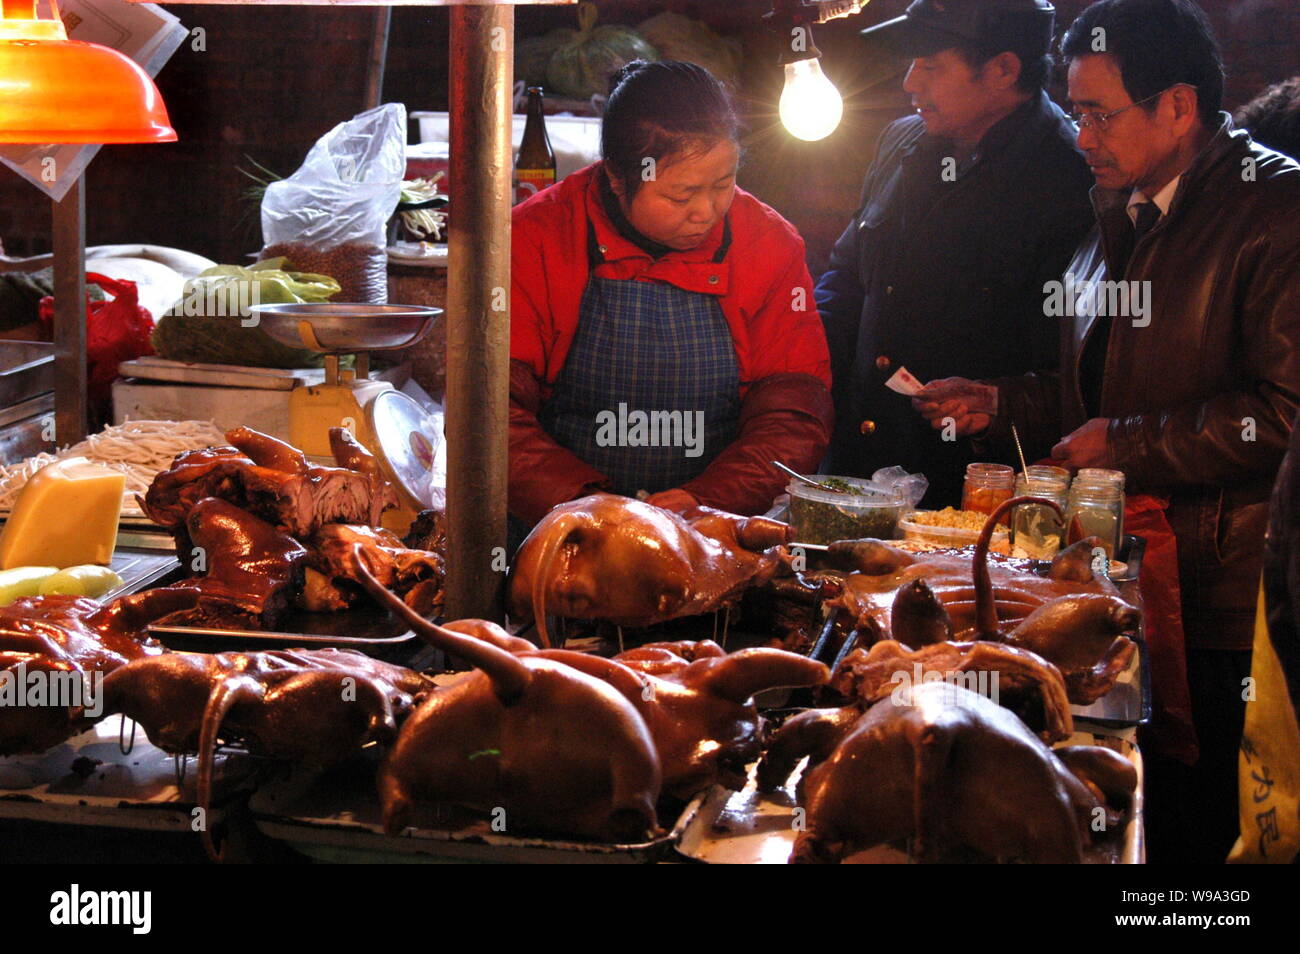 --FILE--A Chinese vendor sells dog meat to customers at a food market in Guiyang city, southwest Chinas Guizhou province, 20 December 2009.   A propos Stock Photo